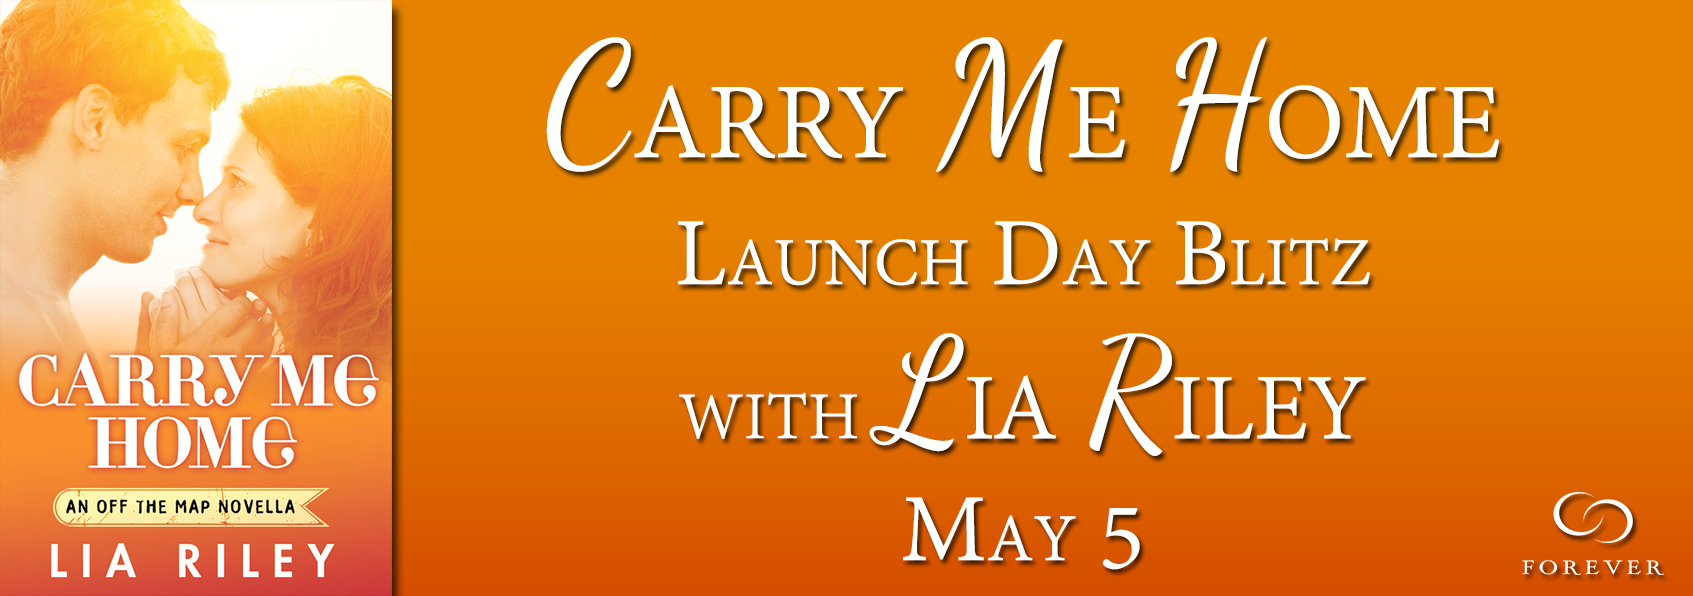 Launch-Day Blitz Carry Me Home by Lia Riley